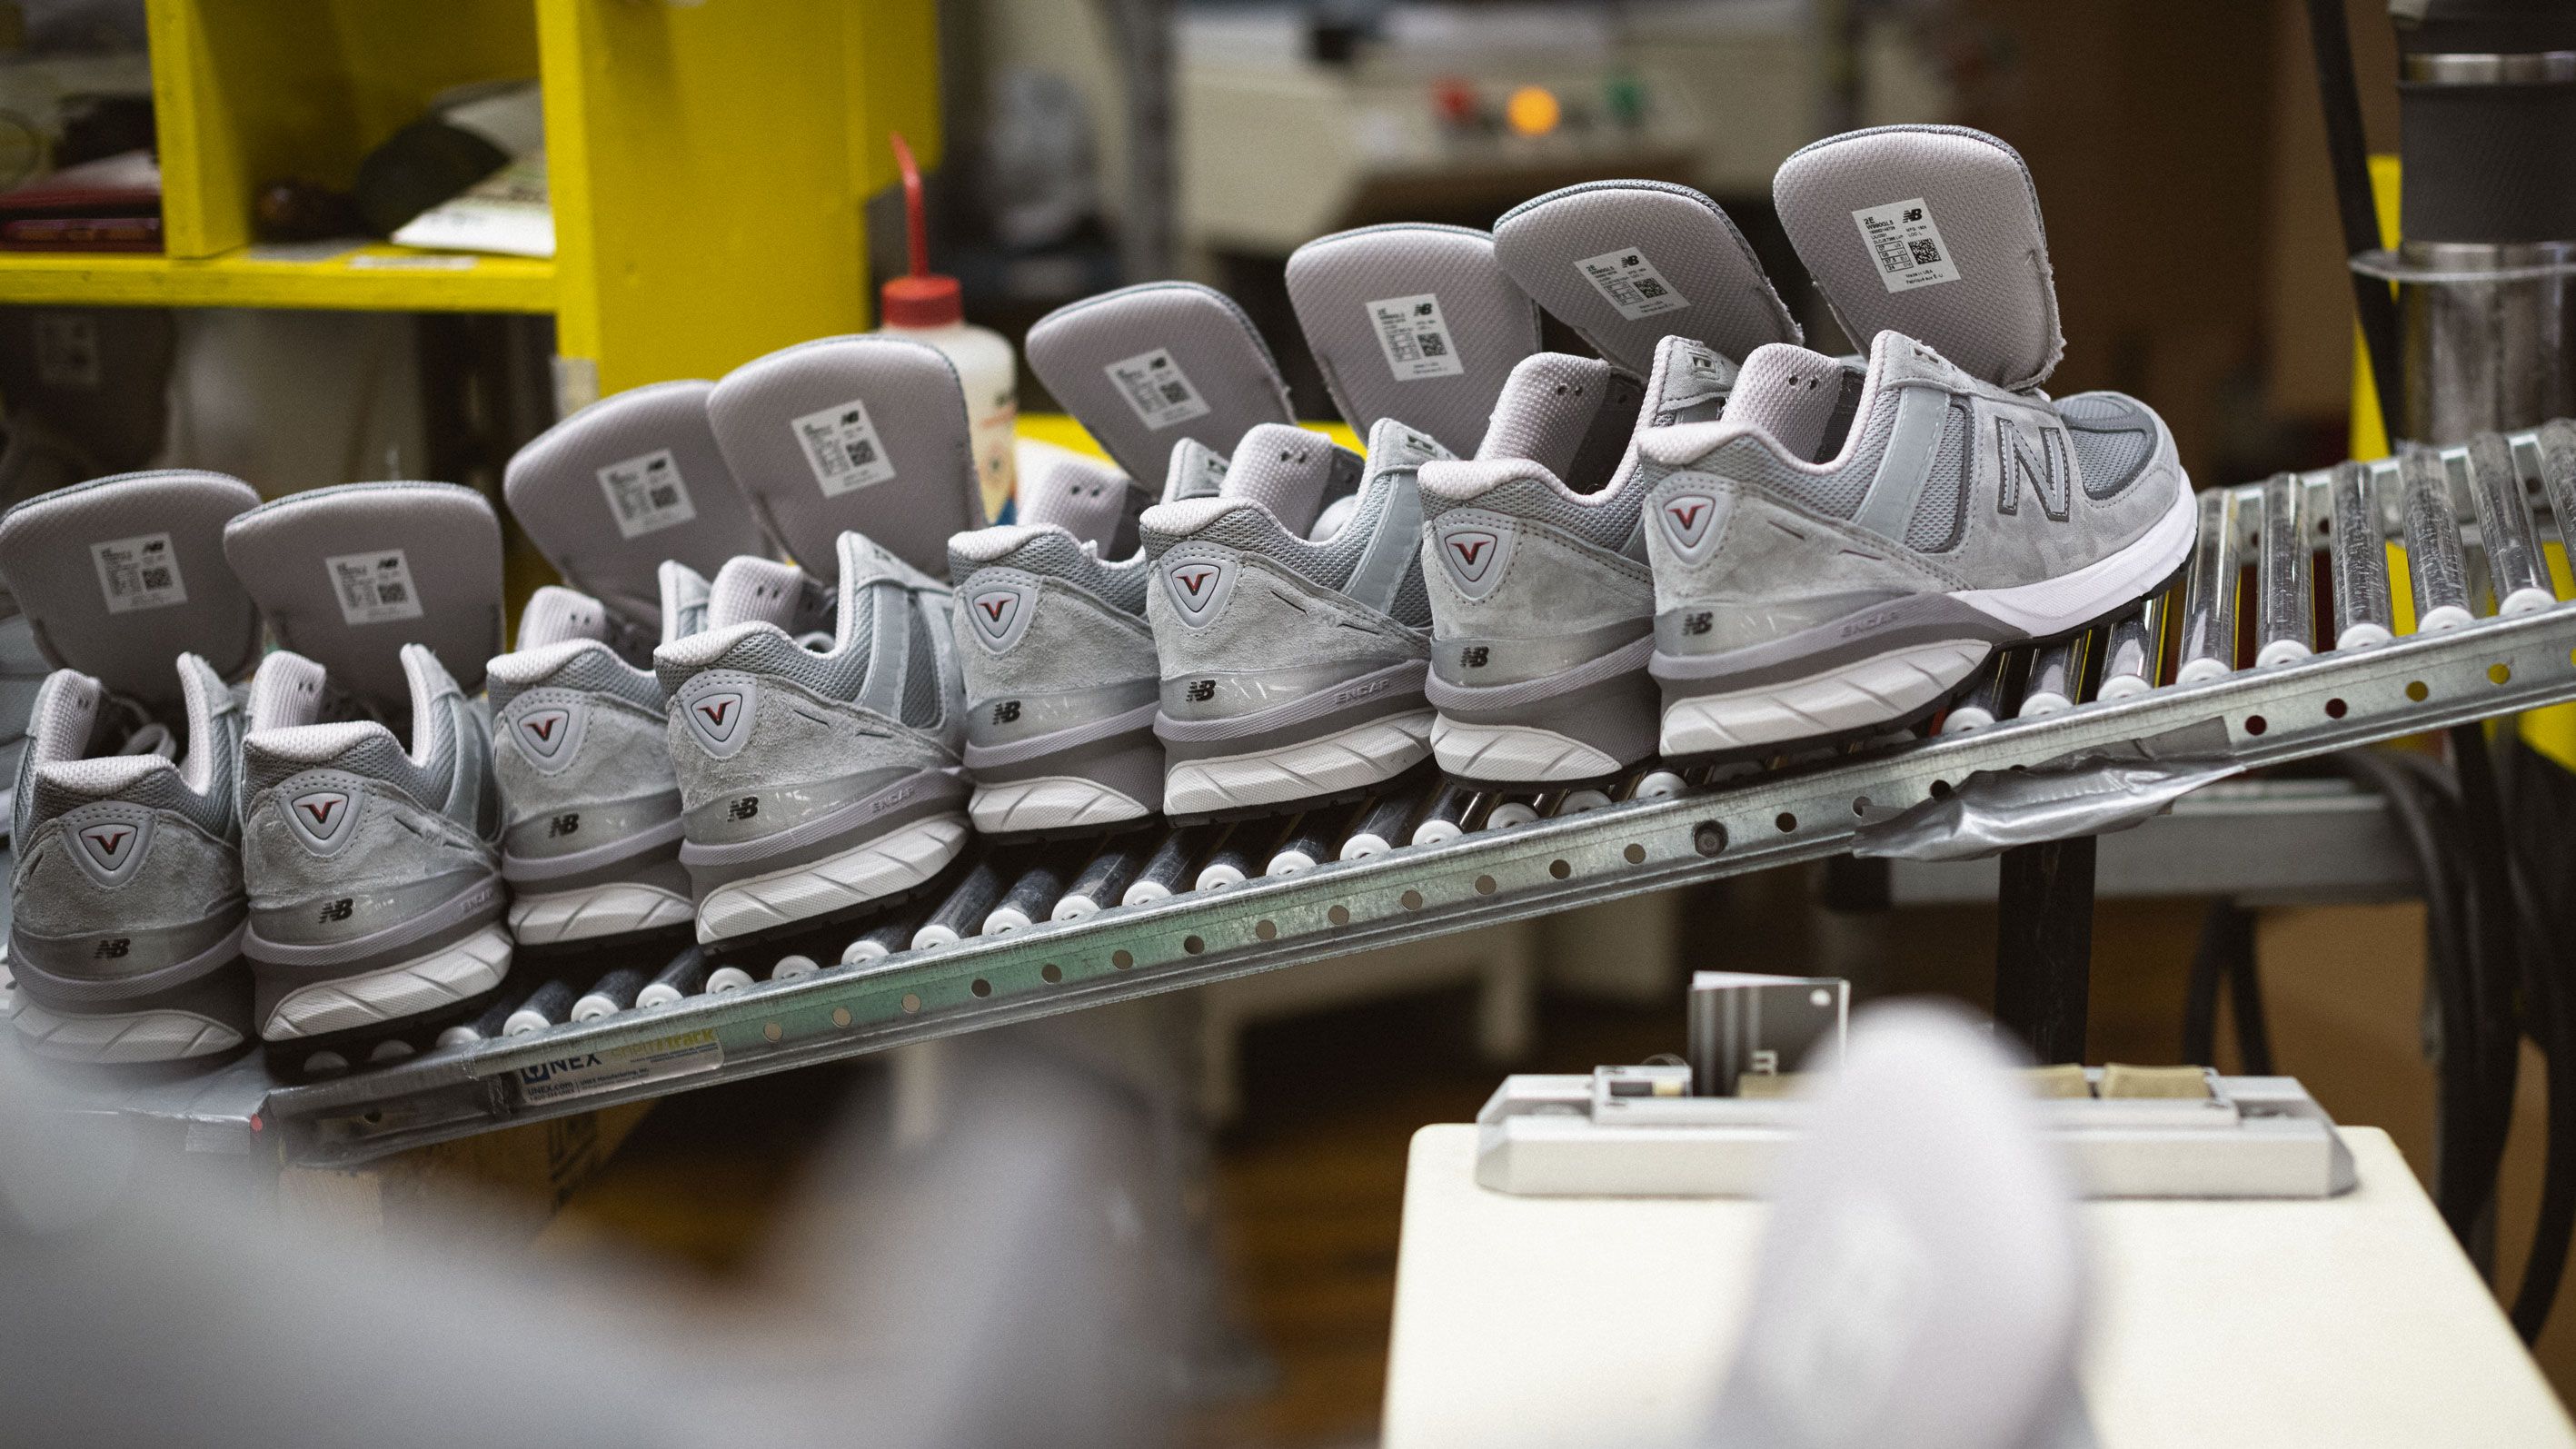 Blazen Bijdrage Opgetild New Balance Factory Tour | How Are New Balance Shoes Made?